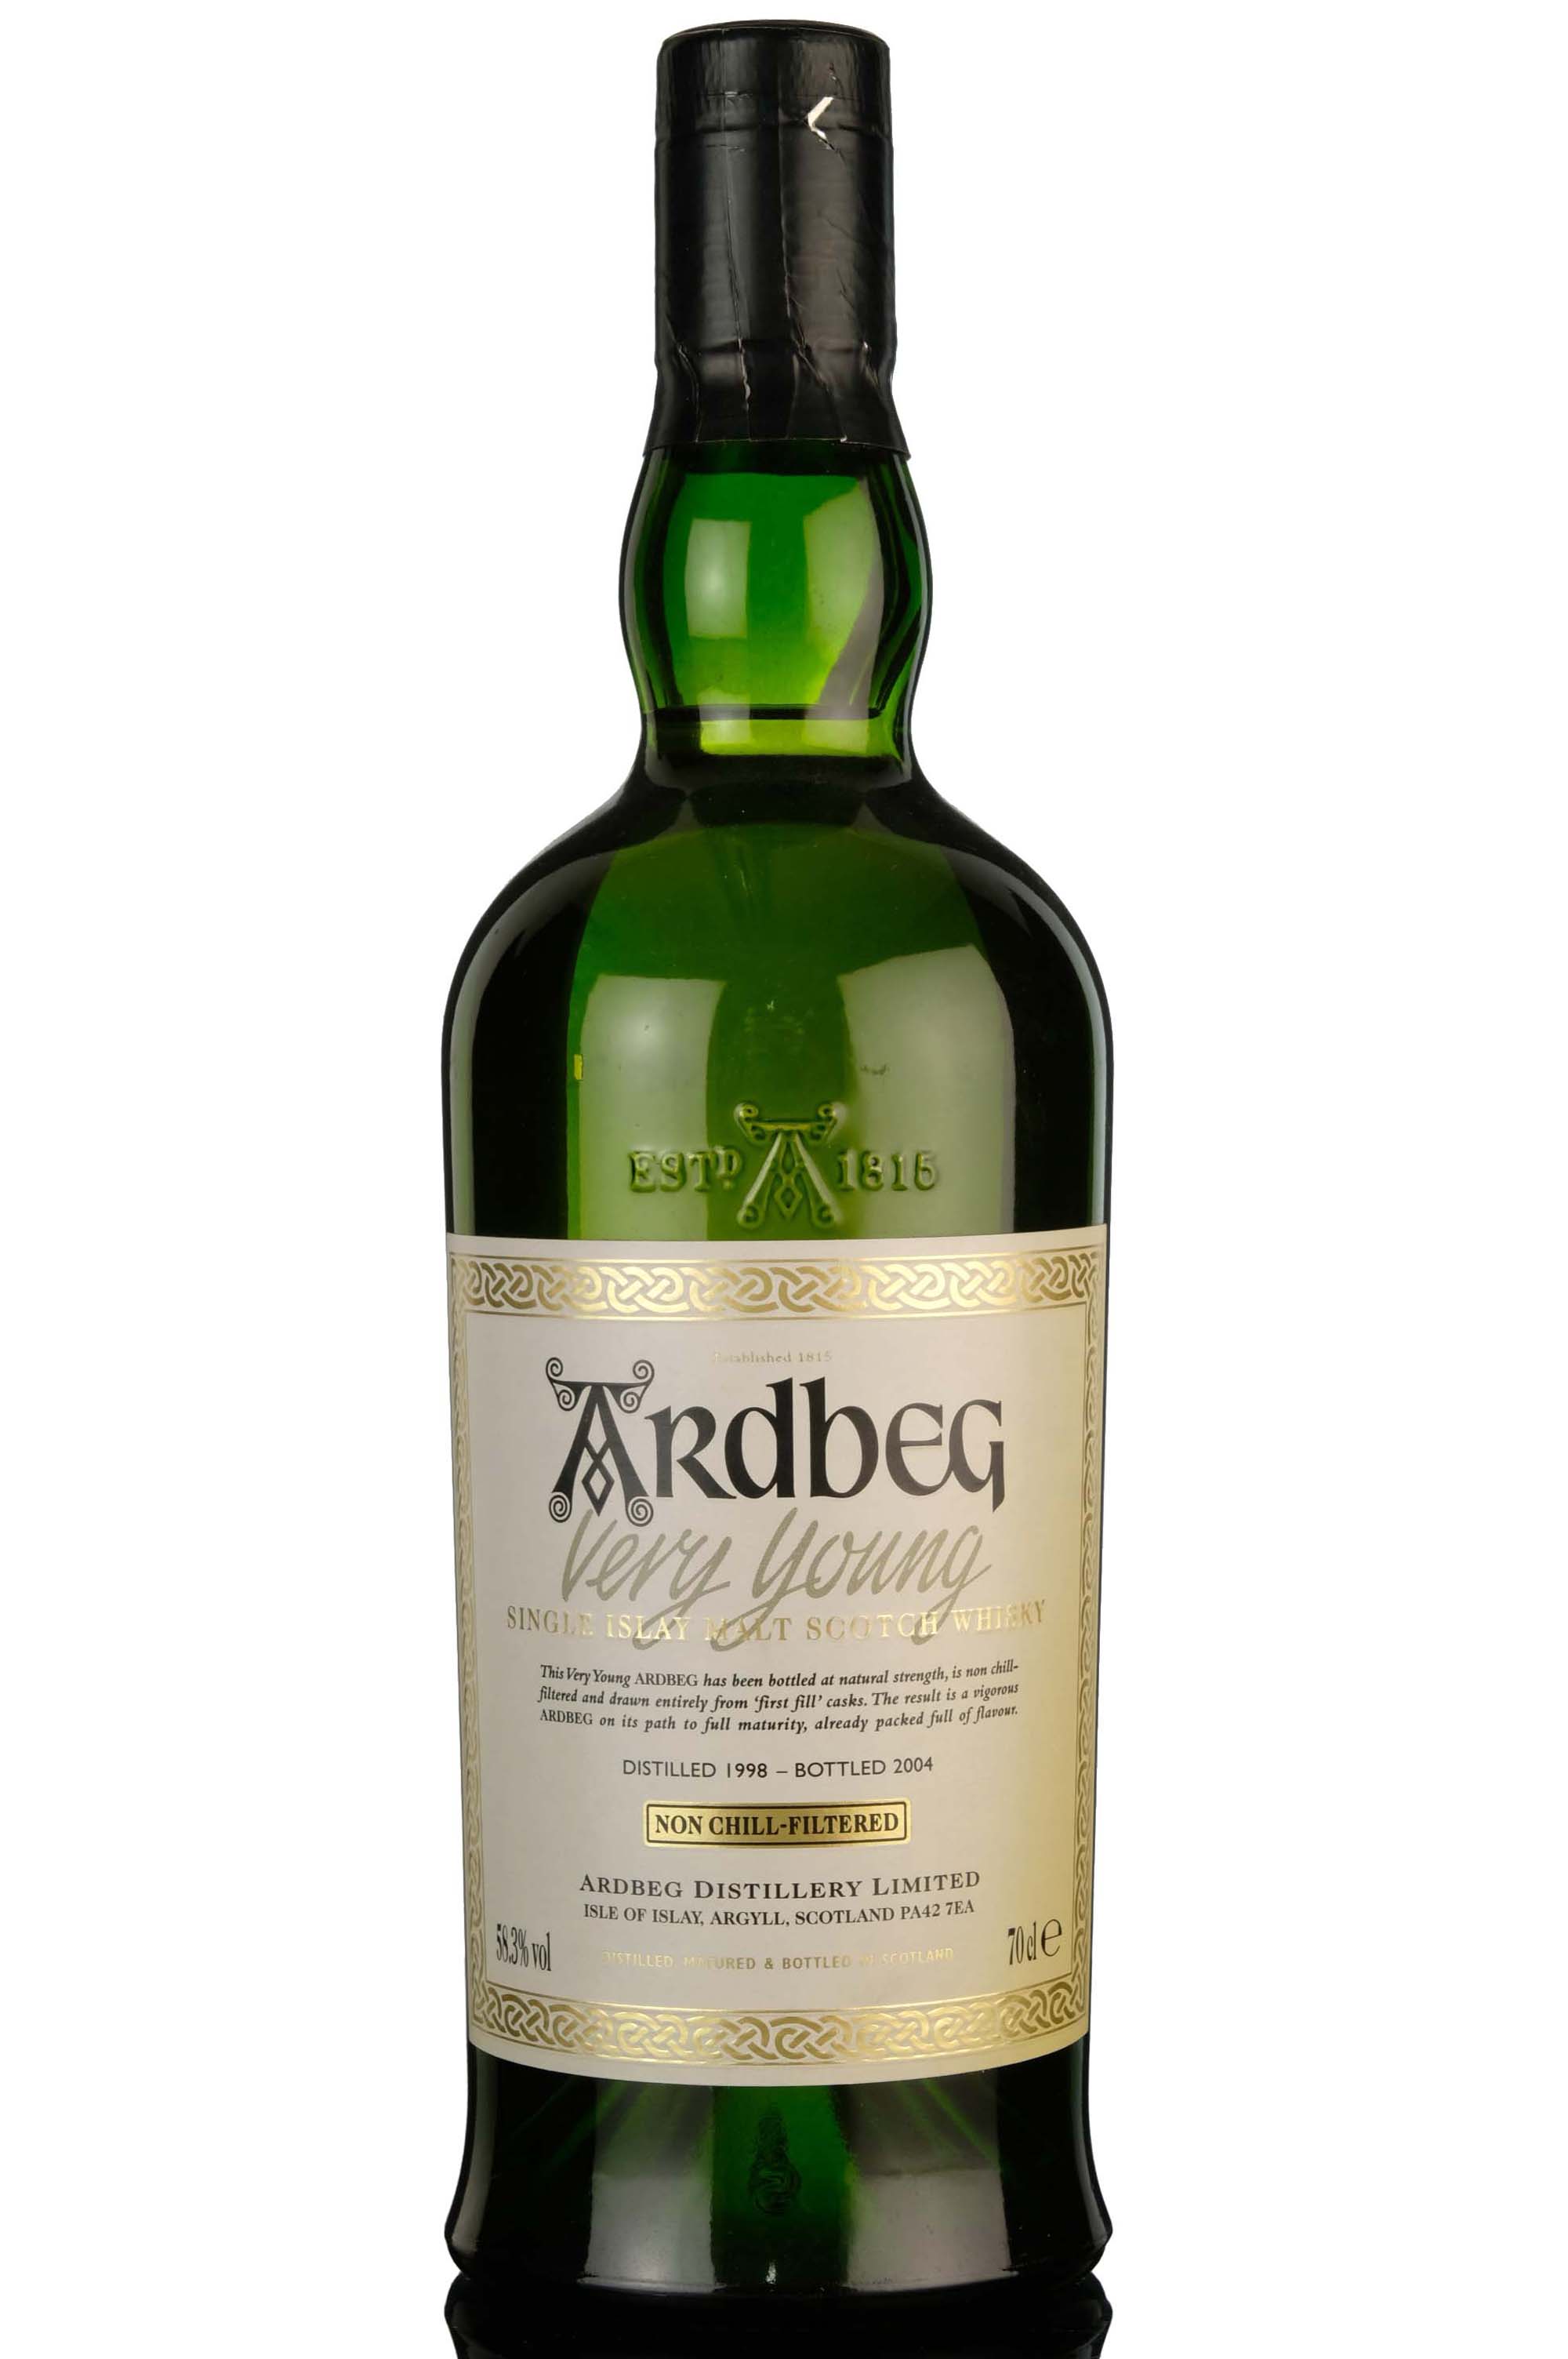 Ardbeg 1998-2004 - Very Young - First Release